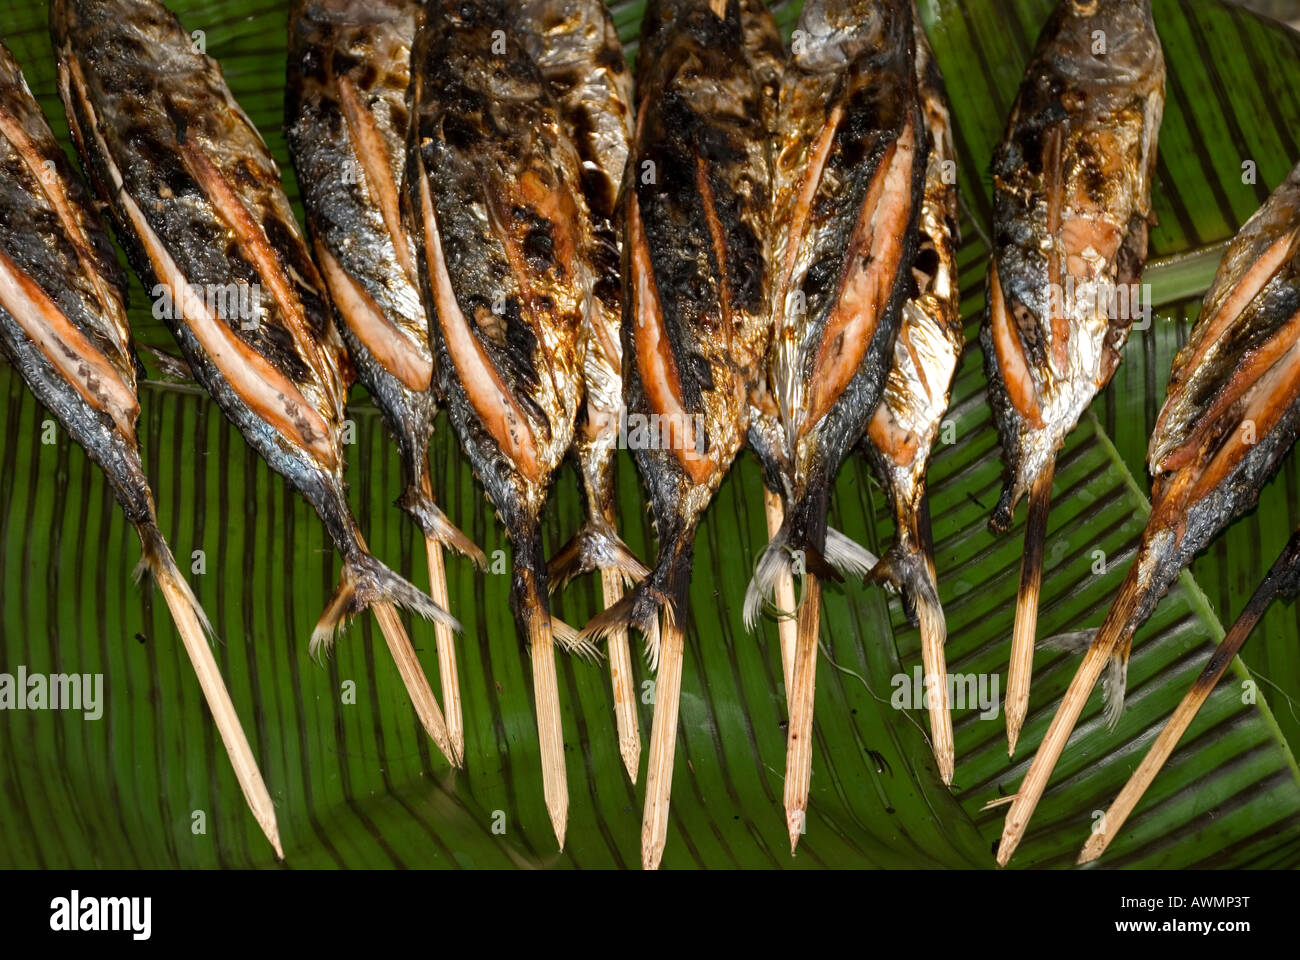 philippines island siquijor town barbecued fish Stock Photo